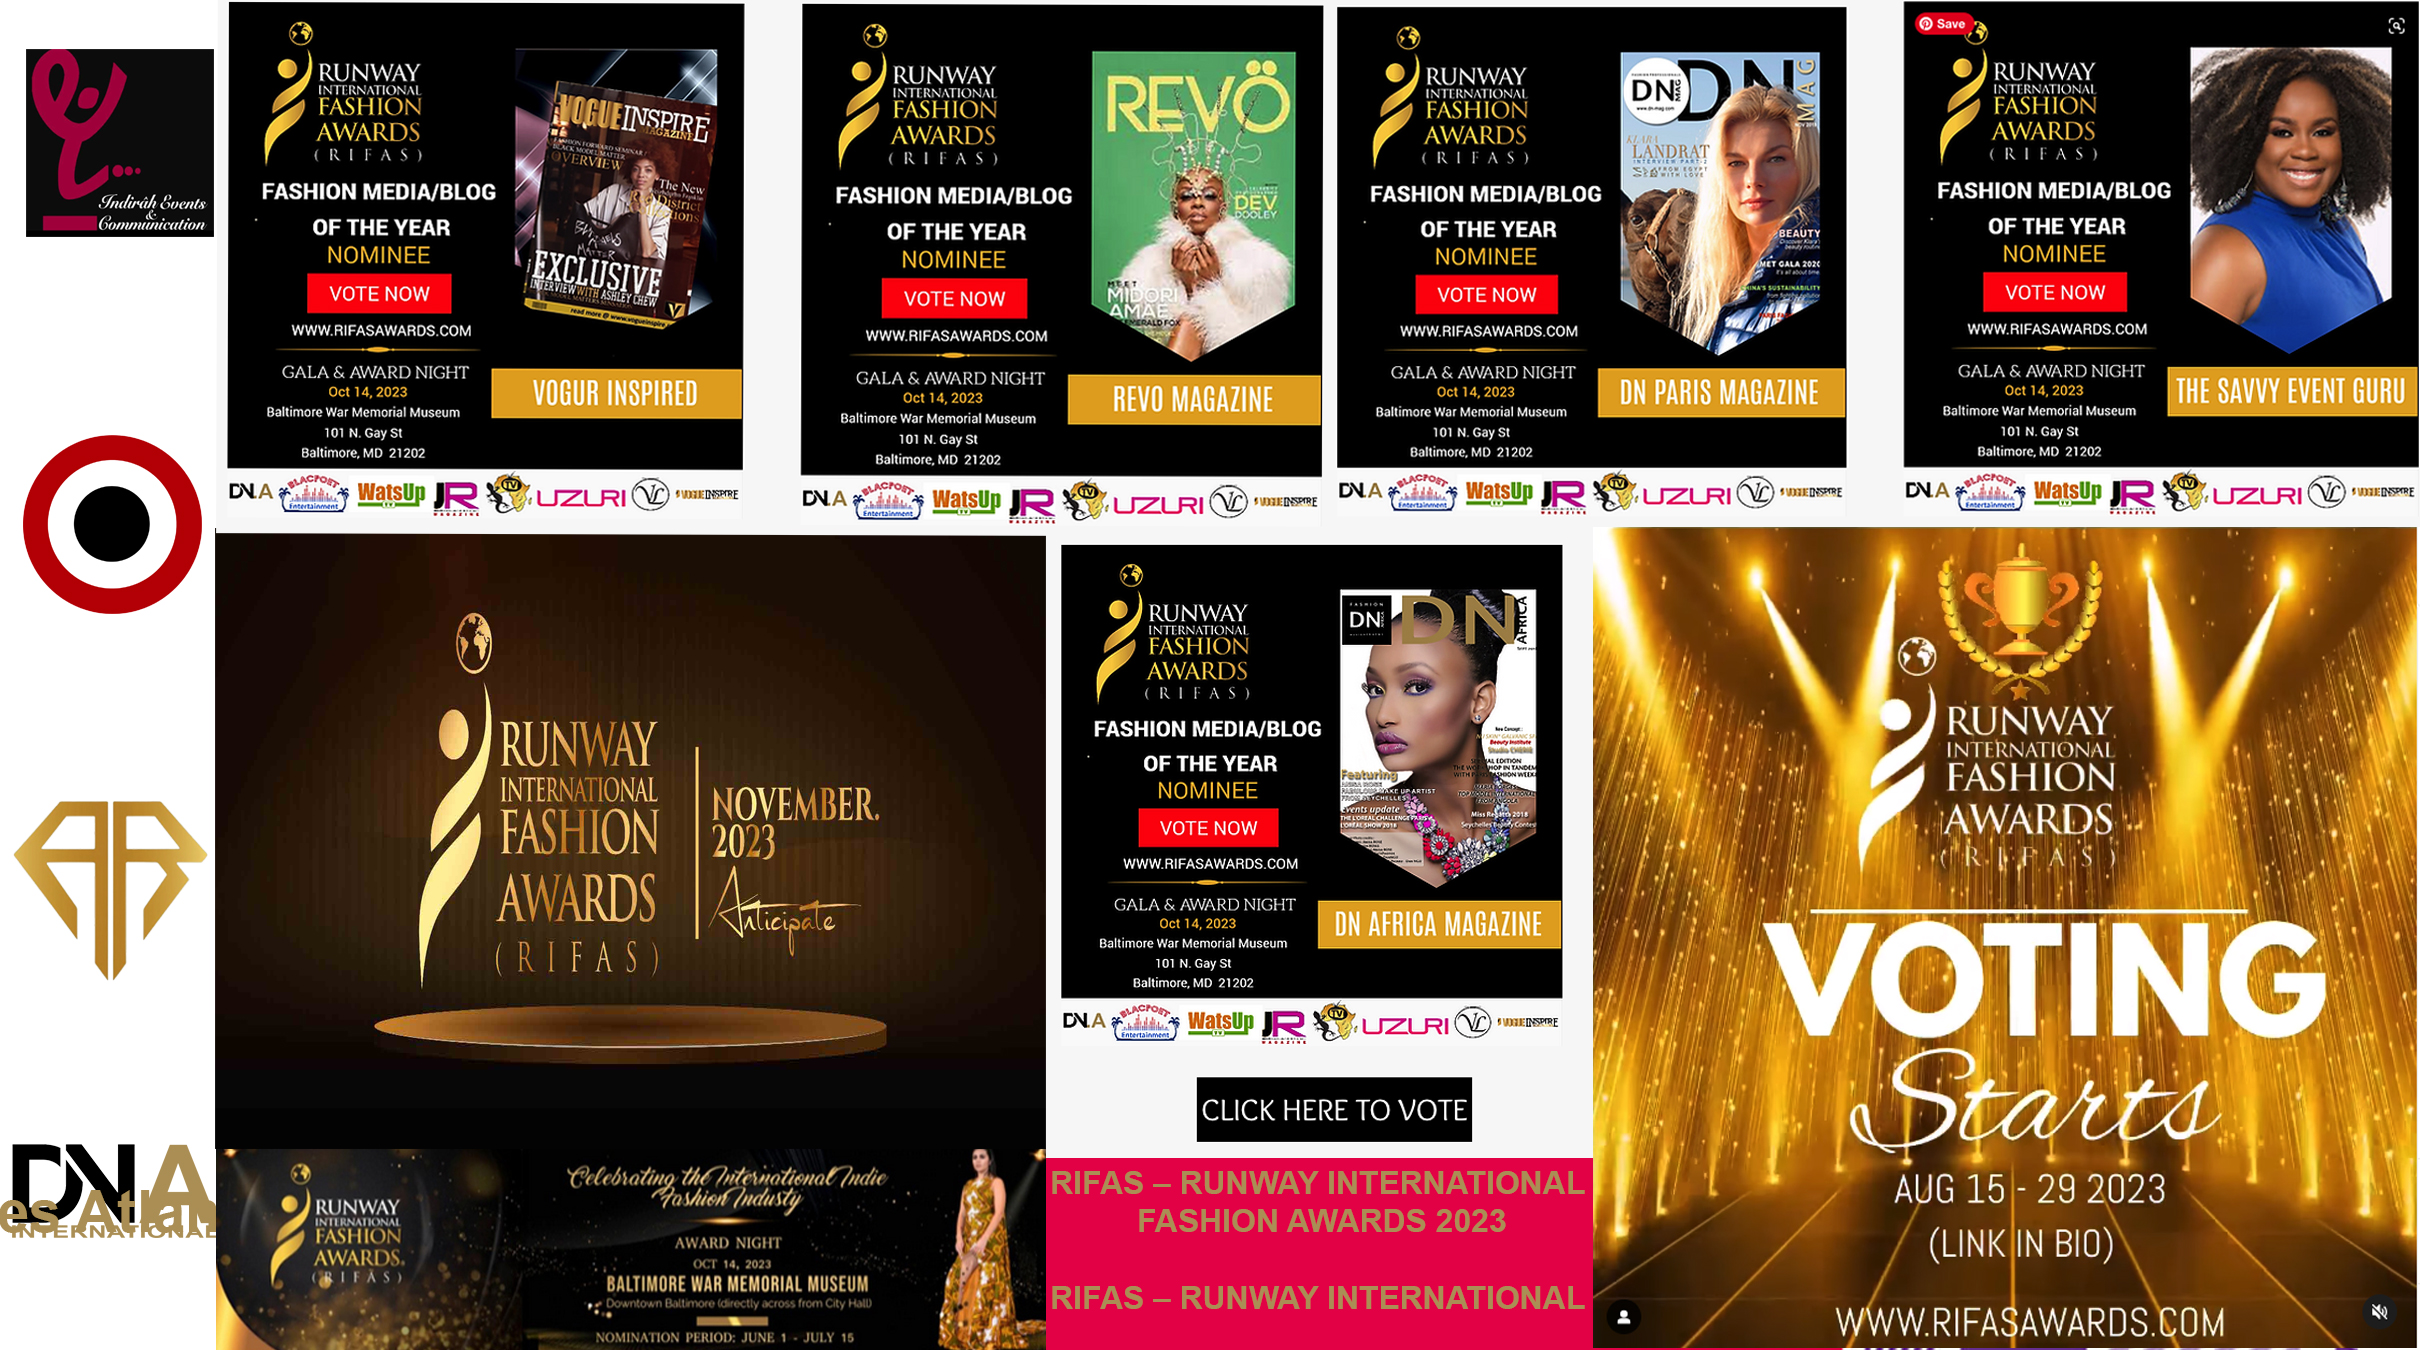 AFRICA-VOGUE-COVER-DN-AFRICA-Media-Partenaire - RUNWAY INTERNATIONAL FASHION AWARDS RIFAS2023 - Category FASHION MEDIA-BLOG OF THE YEAR